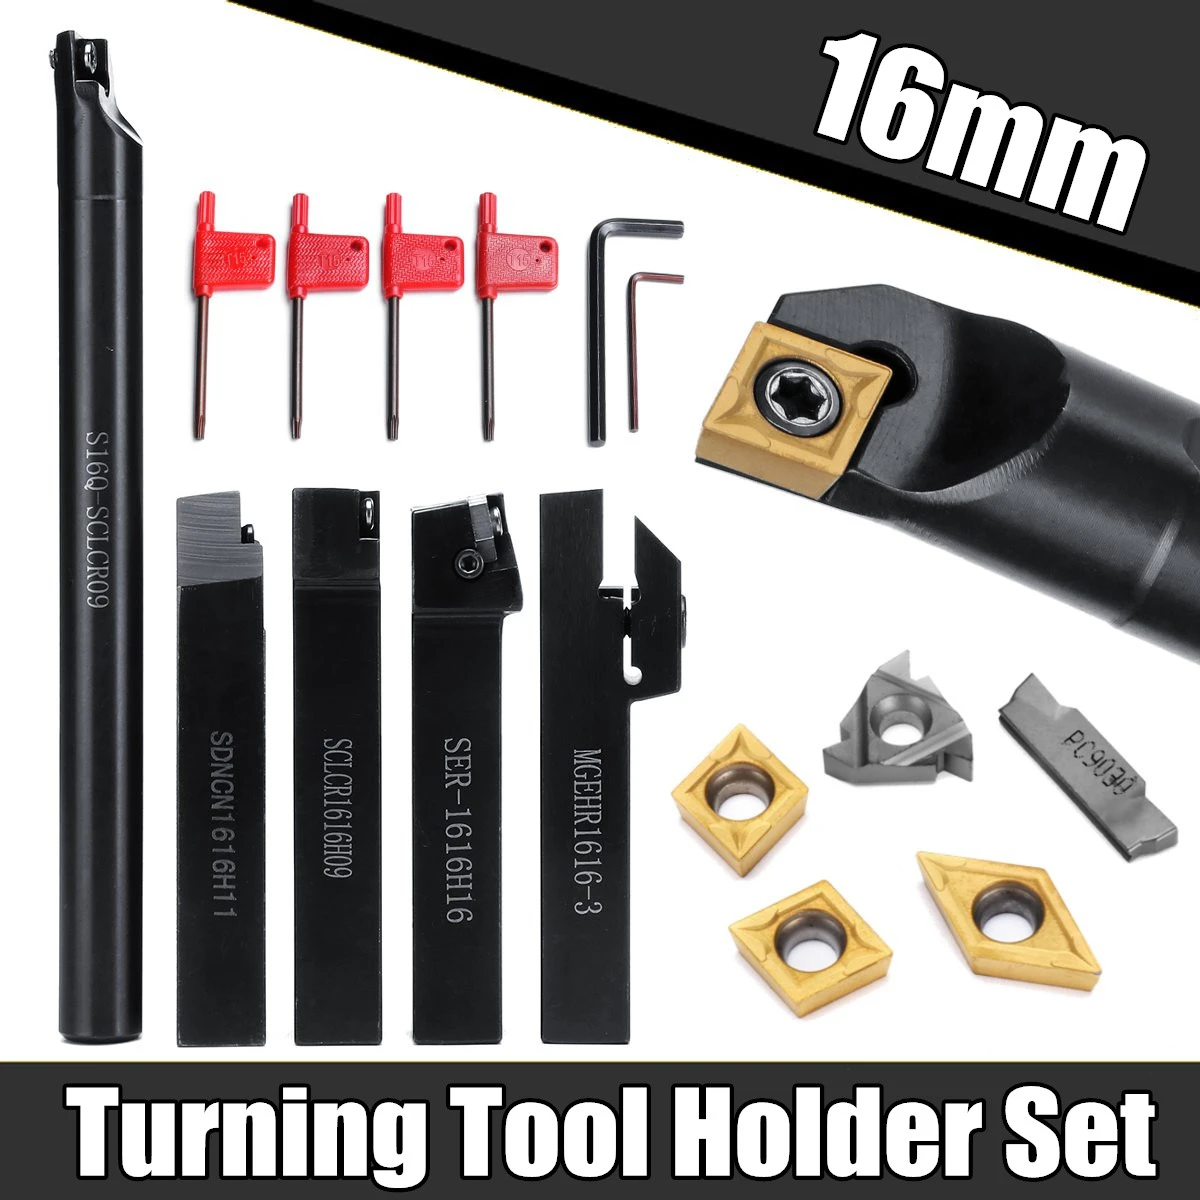 5Pcs 16MM Shank Turning Holder Tool set With Blade&Wrench For Bench Lathe & CNC Turning Tool